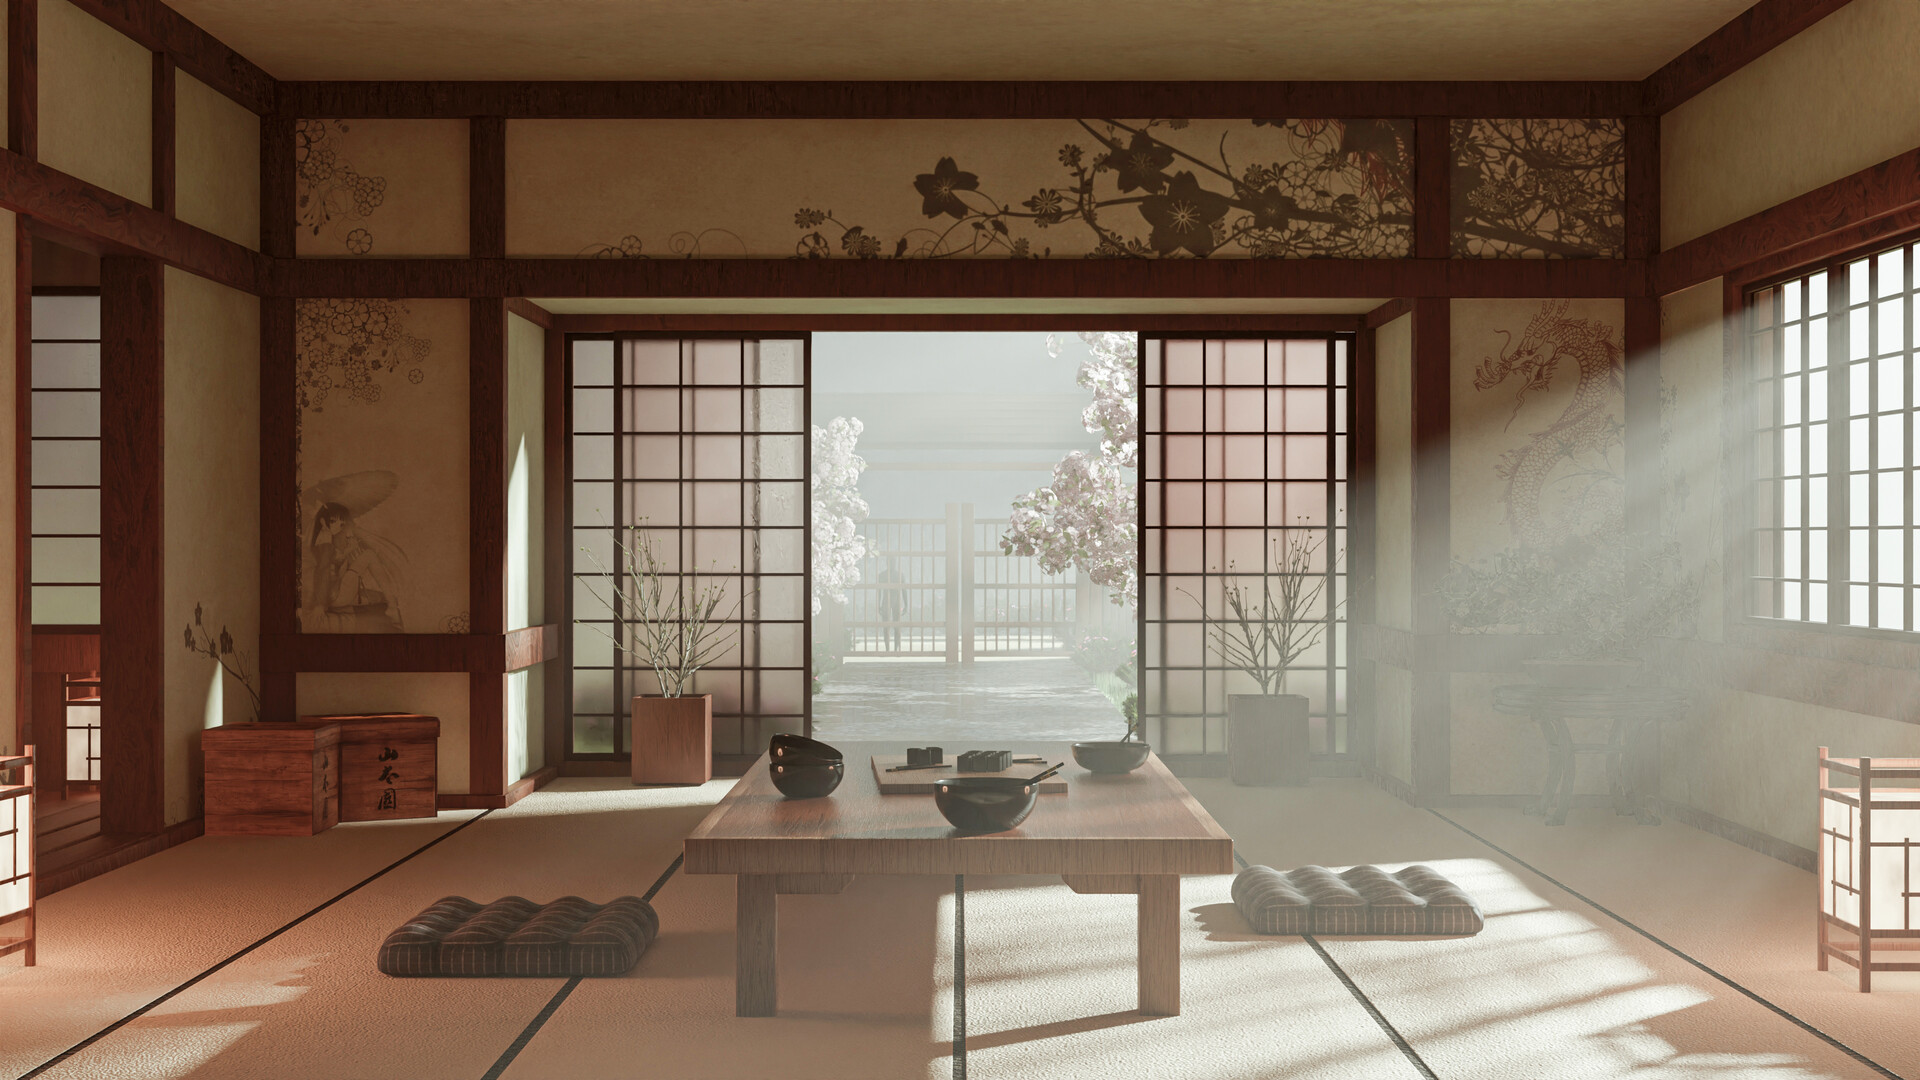 ArtStation - 3d environment in Blender in traditional Chinese style